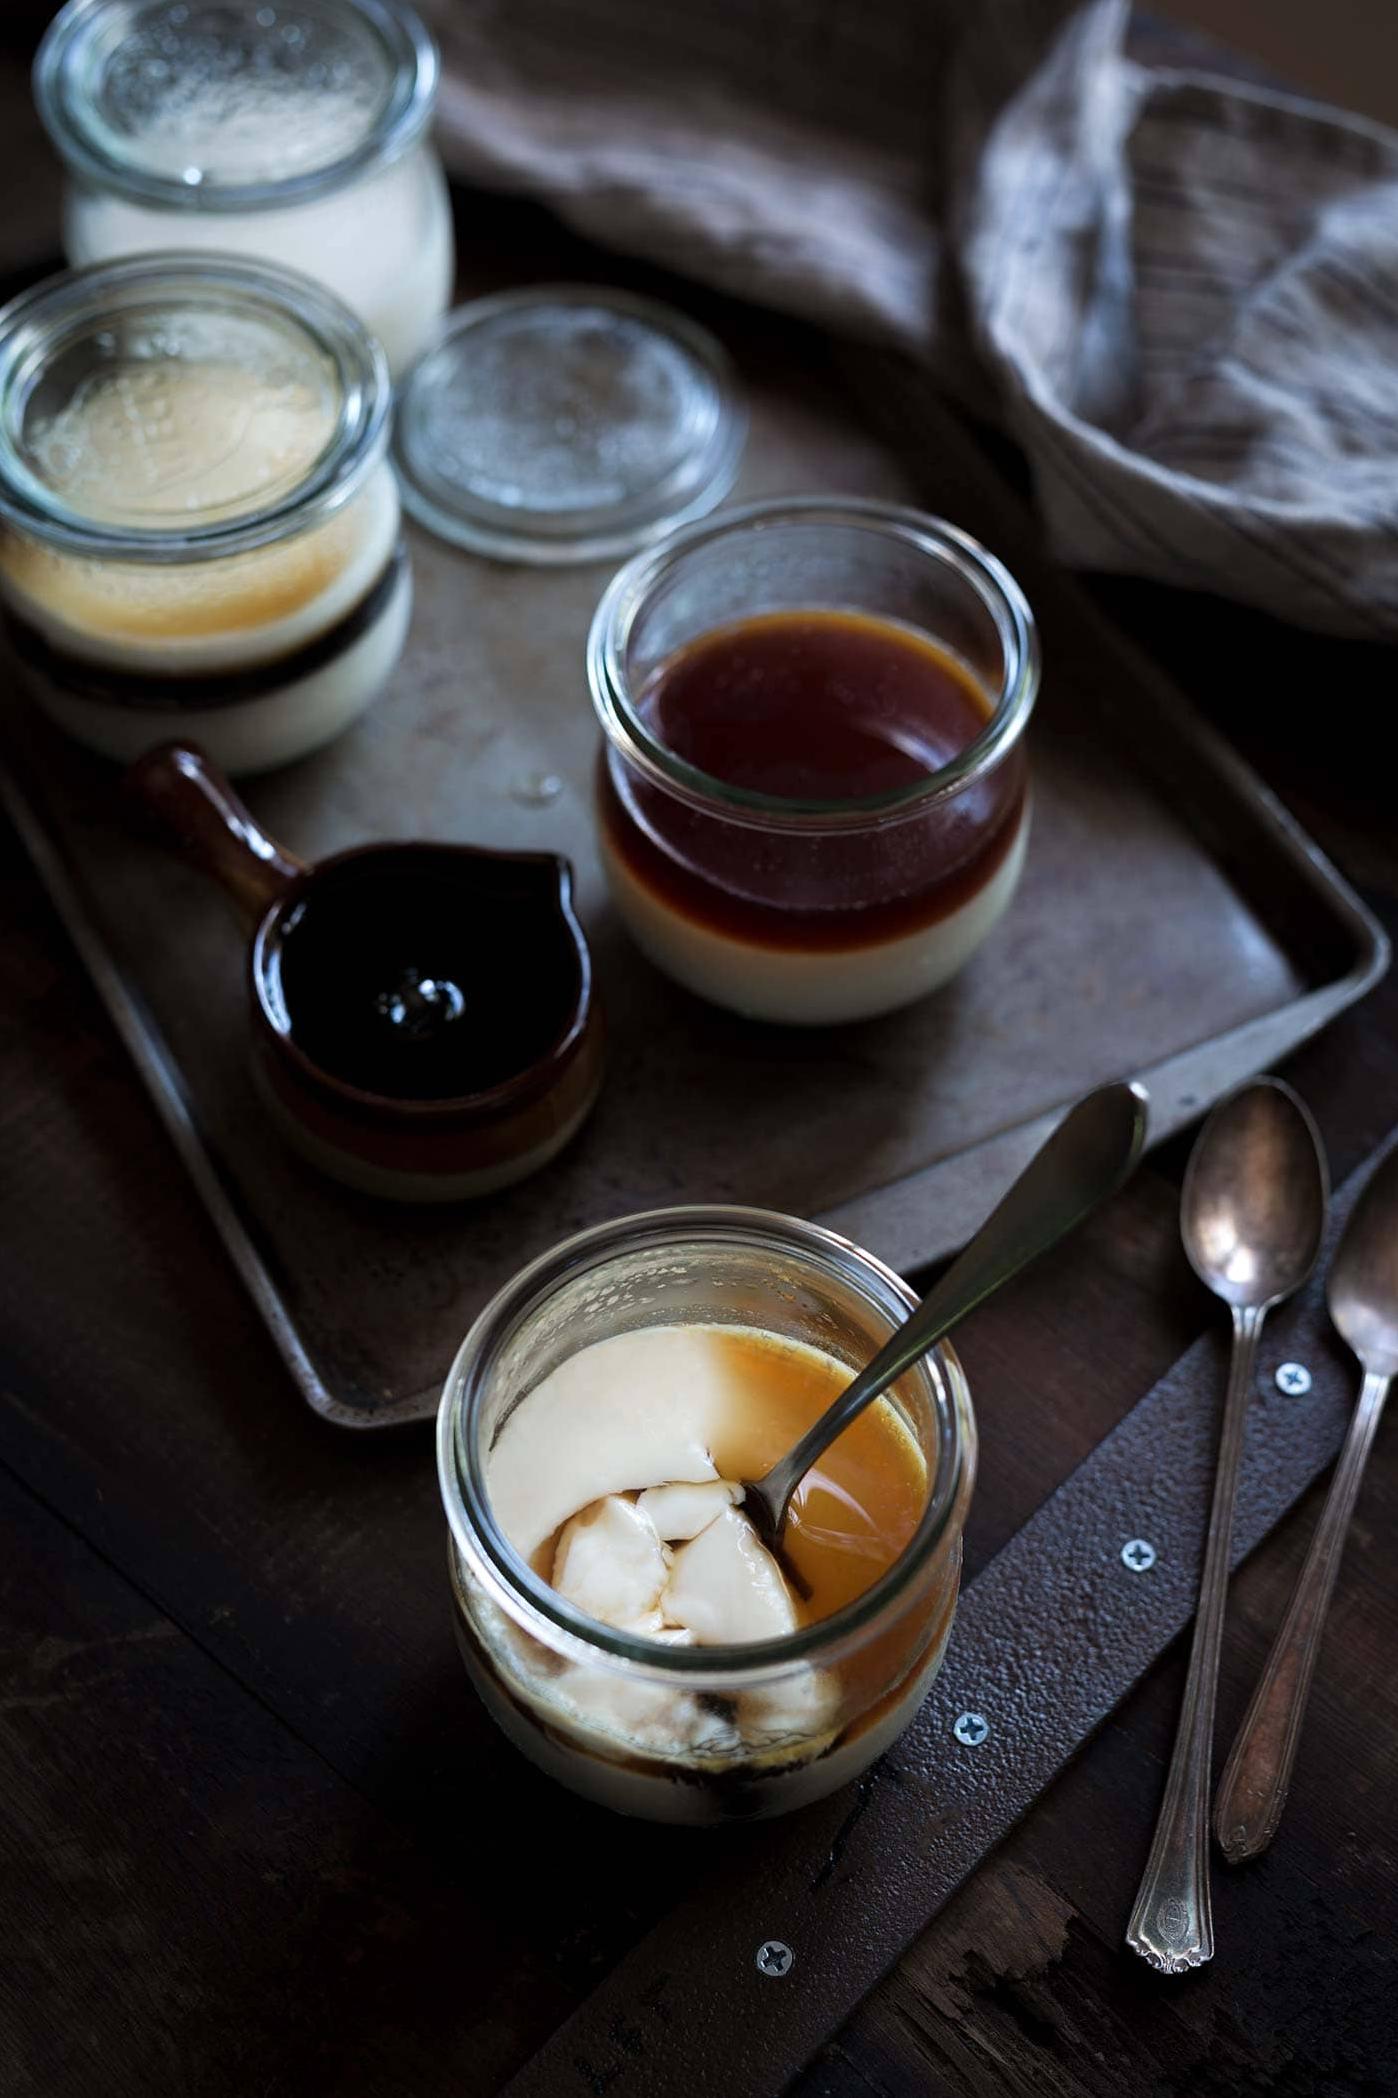  A flavorful way to end a meal, Coffee Syrup Panna Cotta